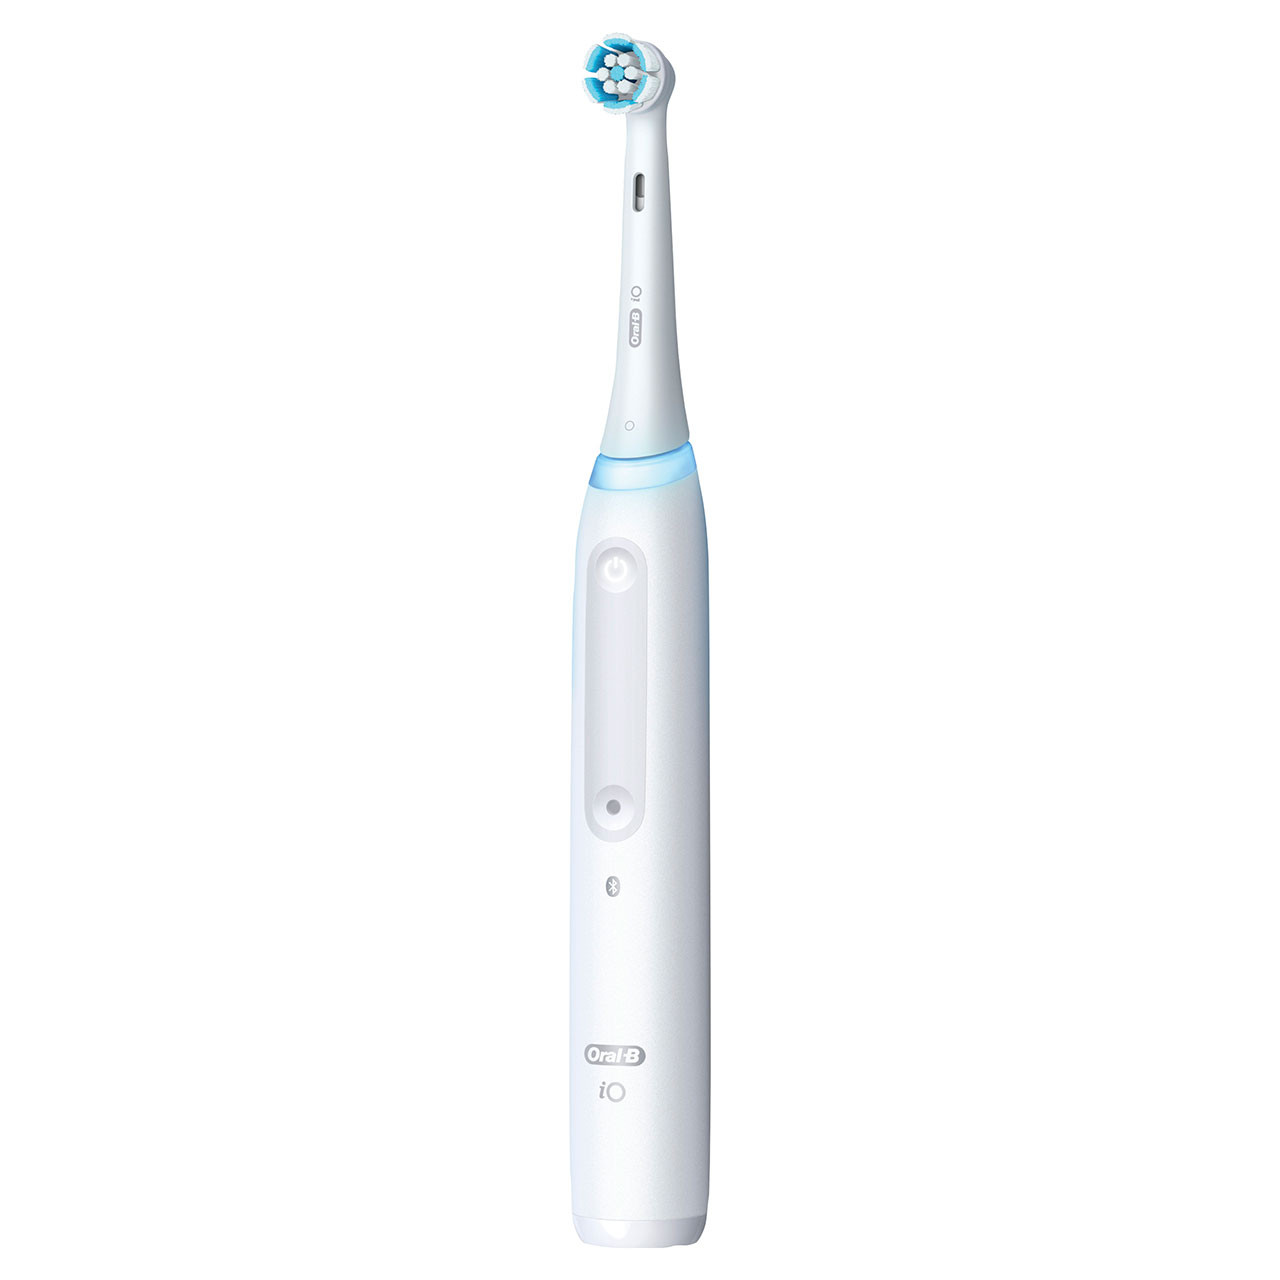 iO Series 4 Gum & Sensitive Rechargeable Electric Toothbrush, White